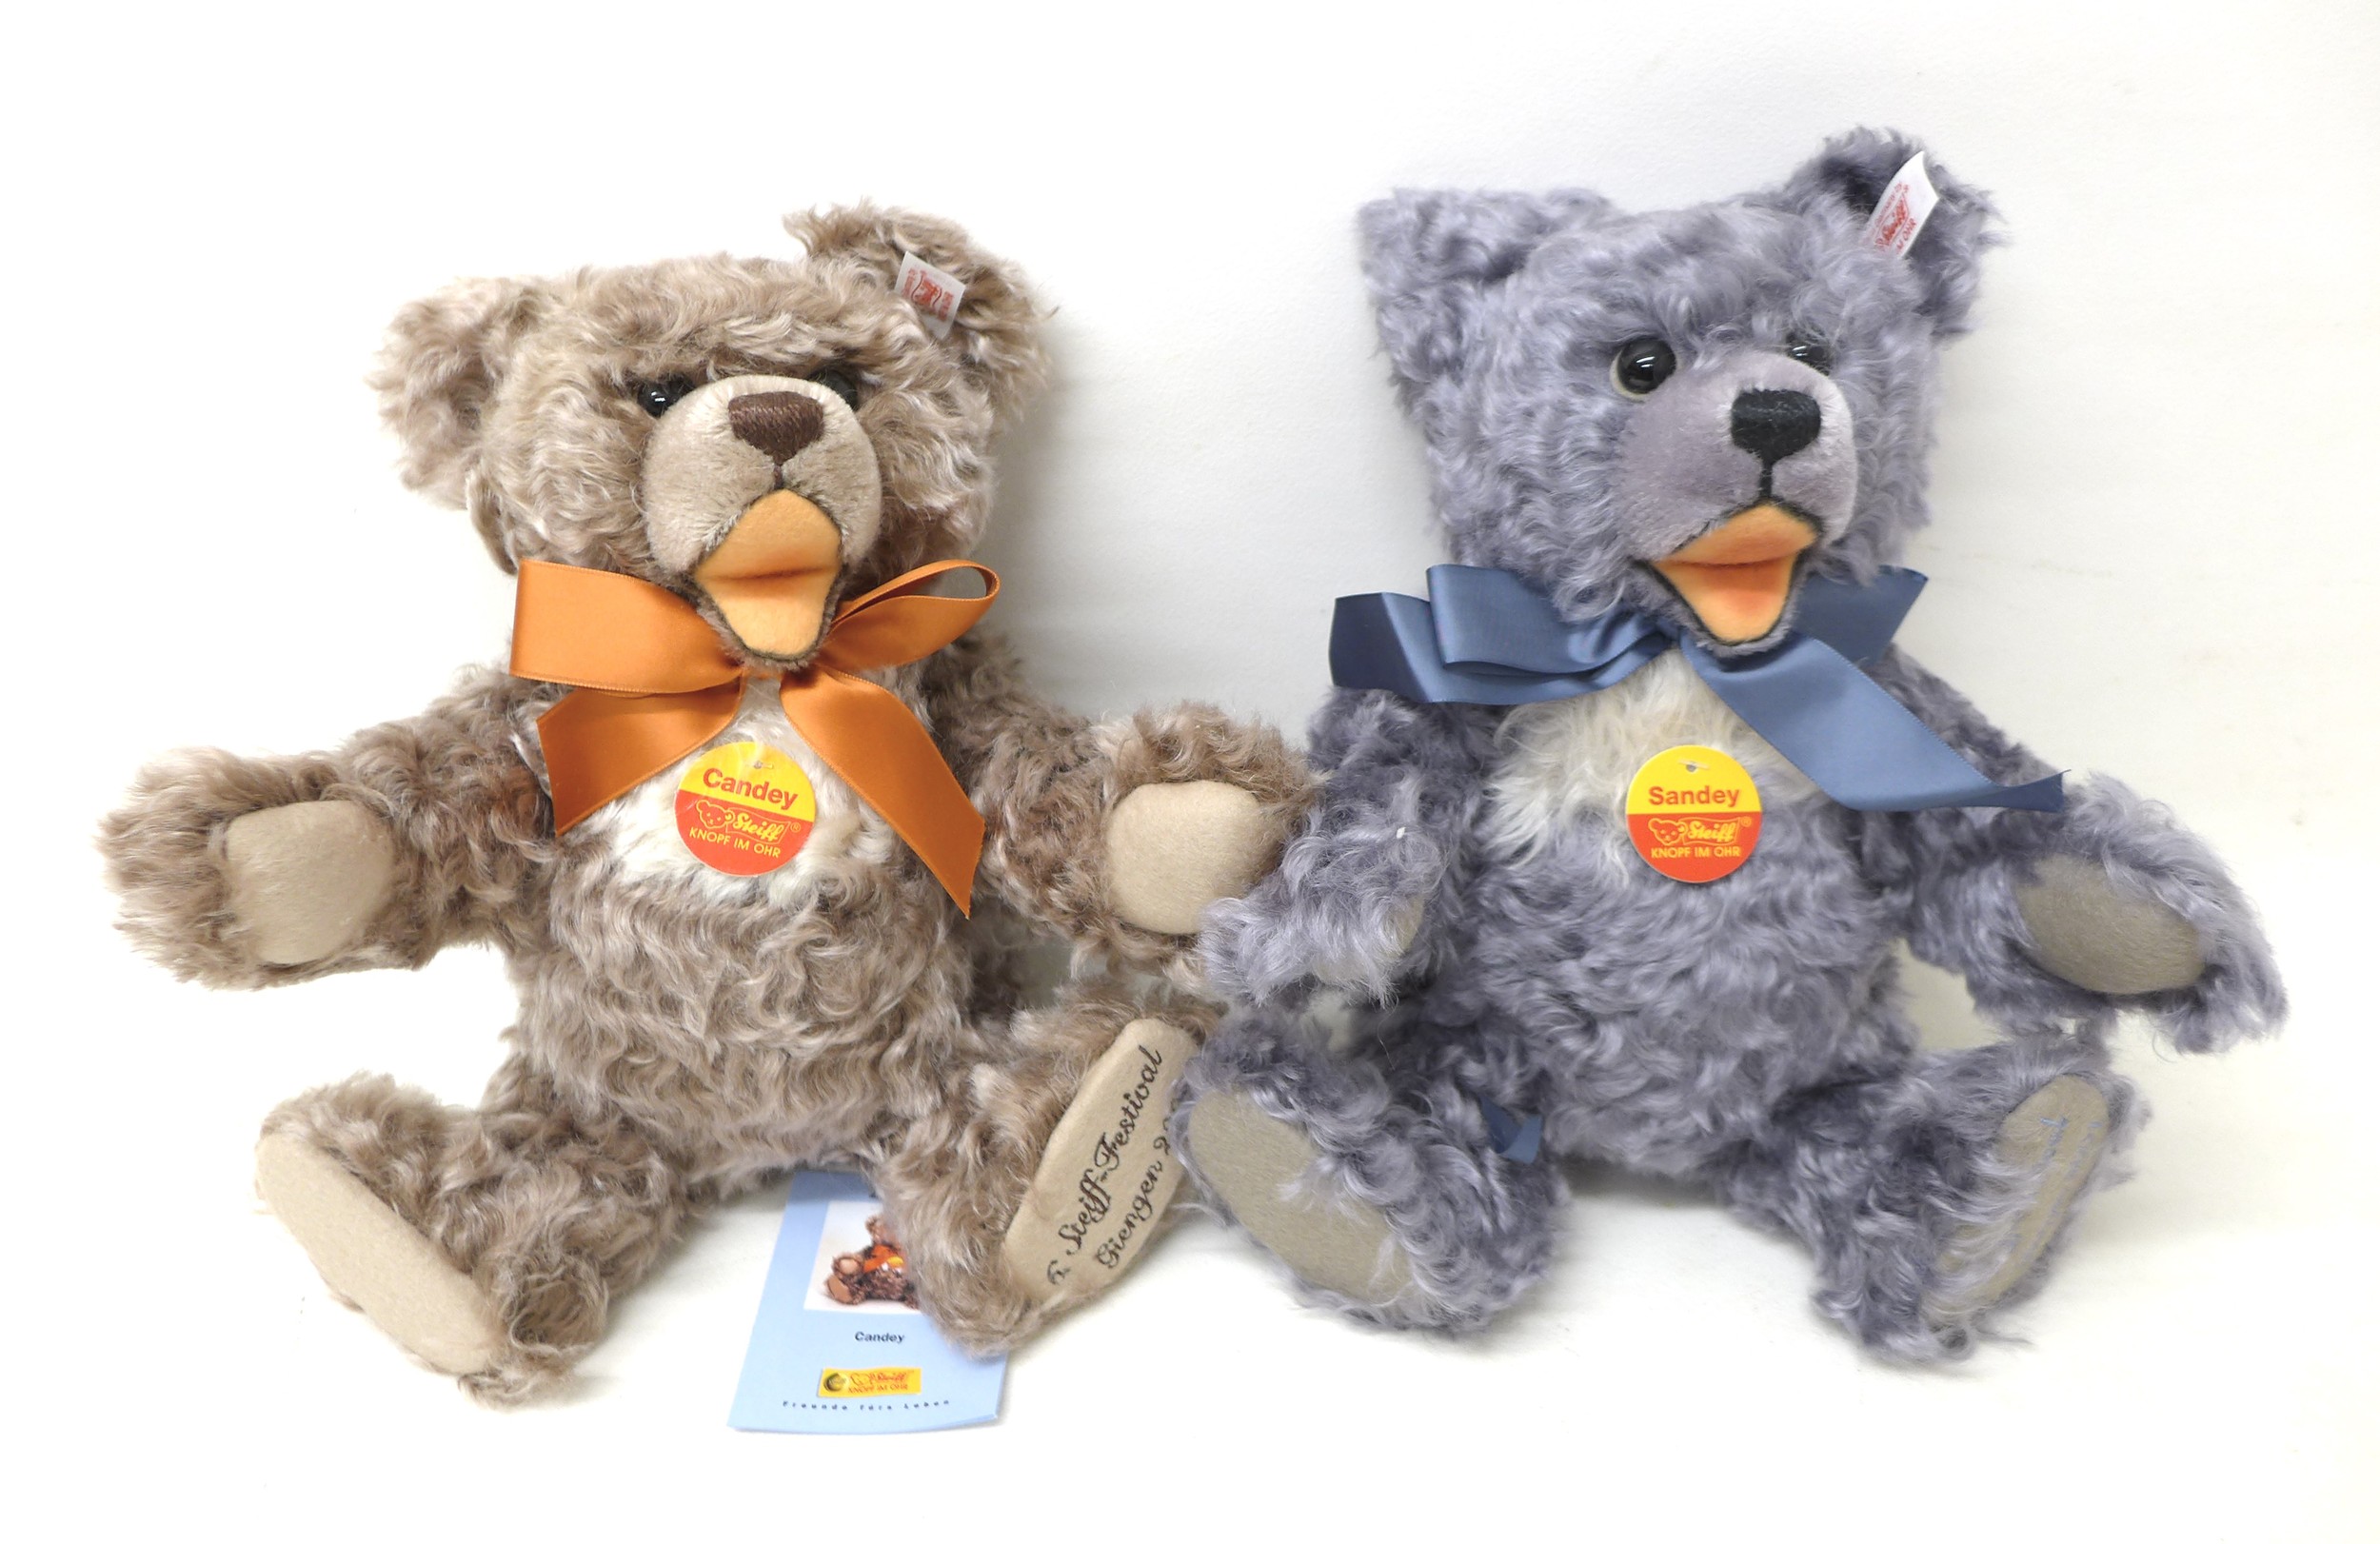 Pair of Steiff Festival Bears, Sandey is a grey/blue mohair, posable five jointed 5th festival bear, - Image 3 of 11